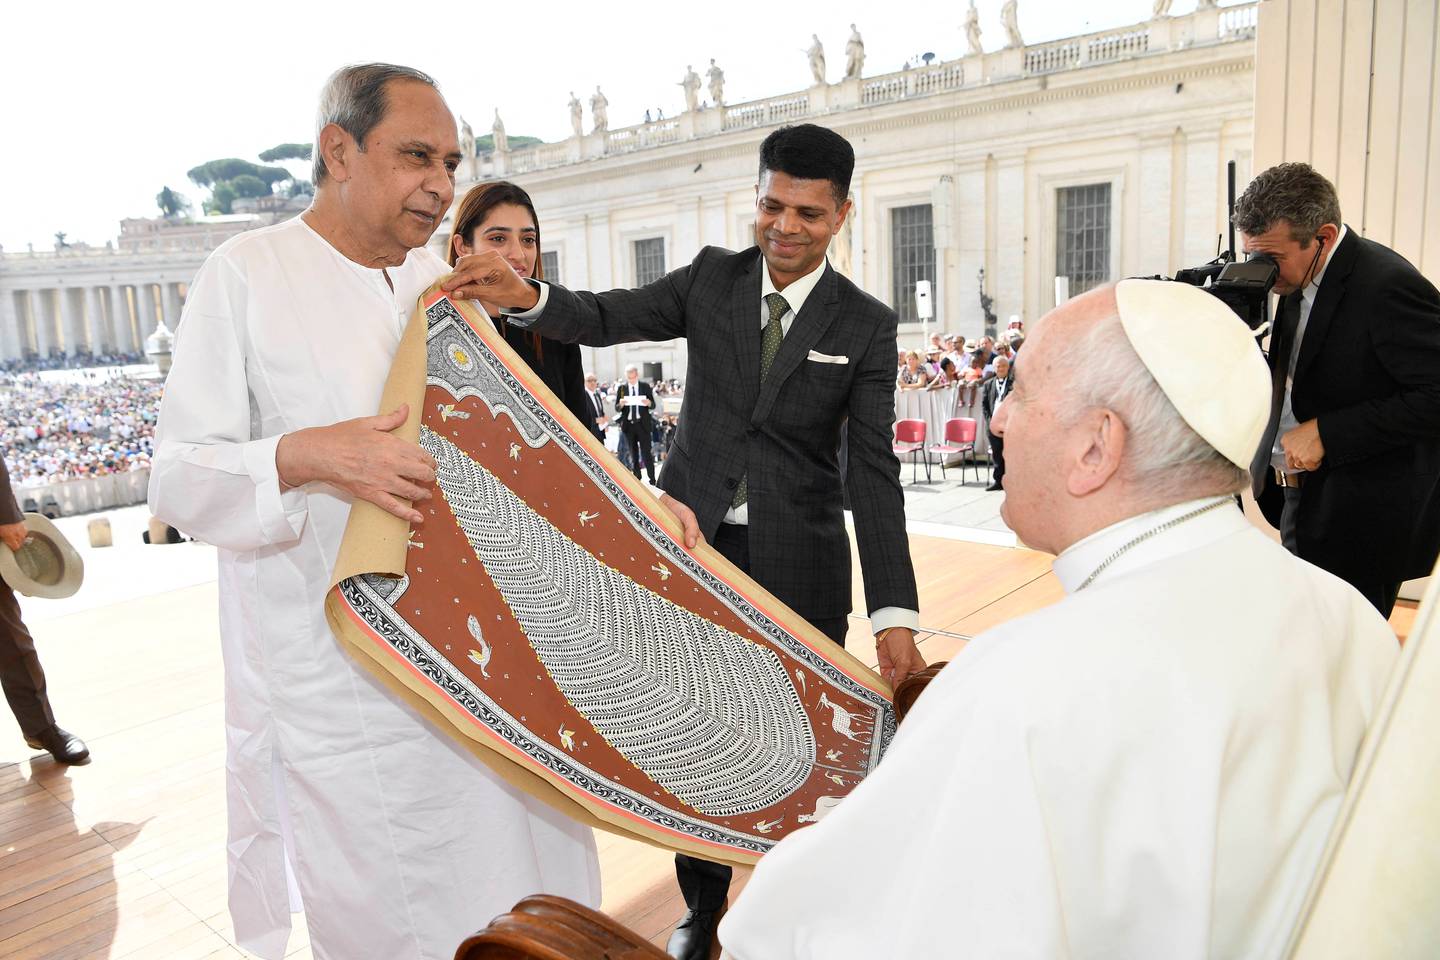 Pope Francis meets Odisha Chief Minister Naveen Patnaik at the Vatican on June 22. Patnaik belongs to a political dynasty, with his father, Biju Patnaik, having also served as chief minister. Reuters